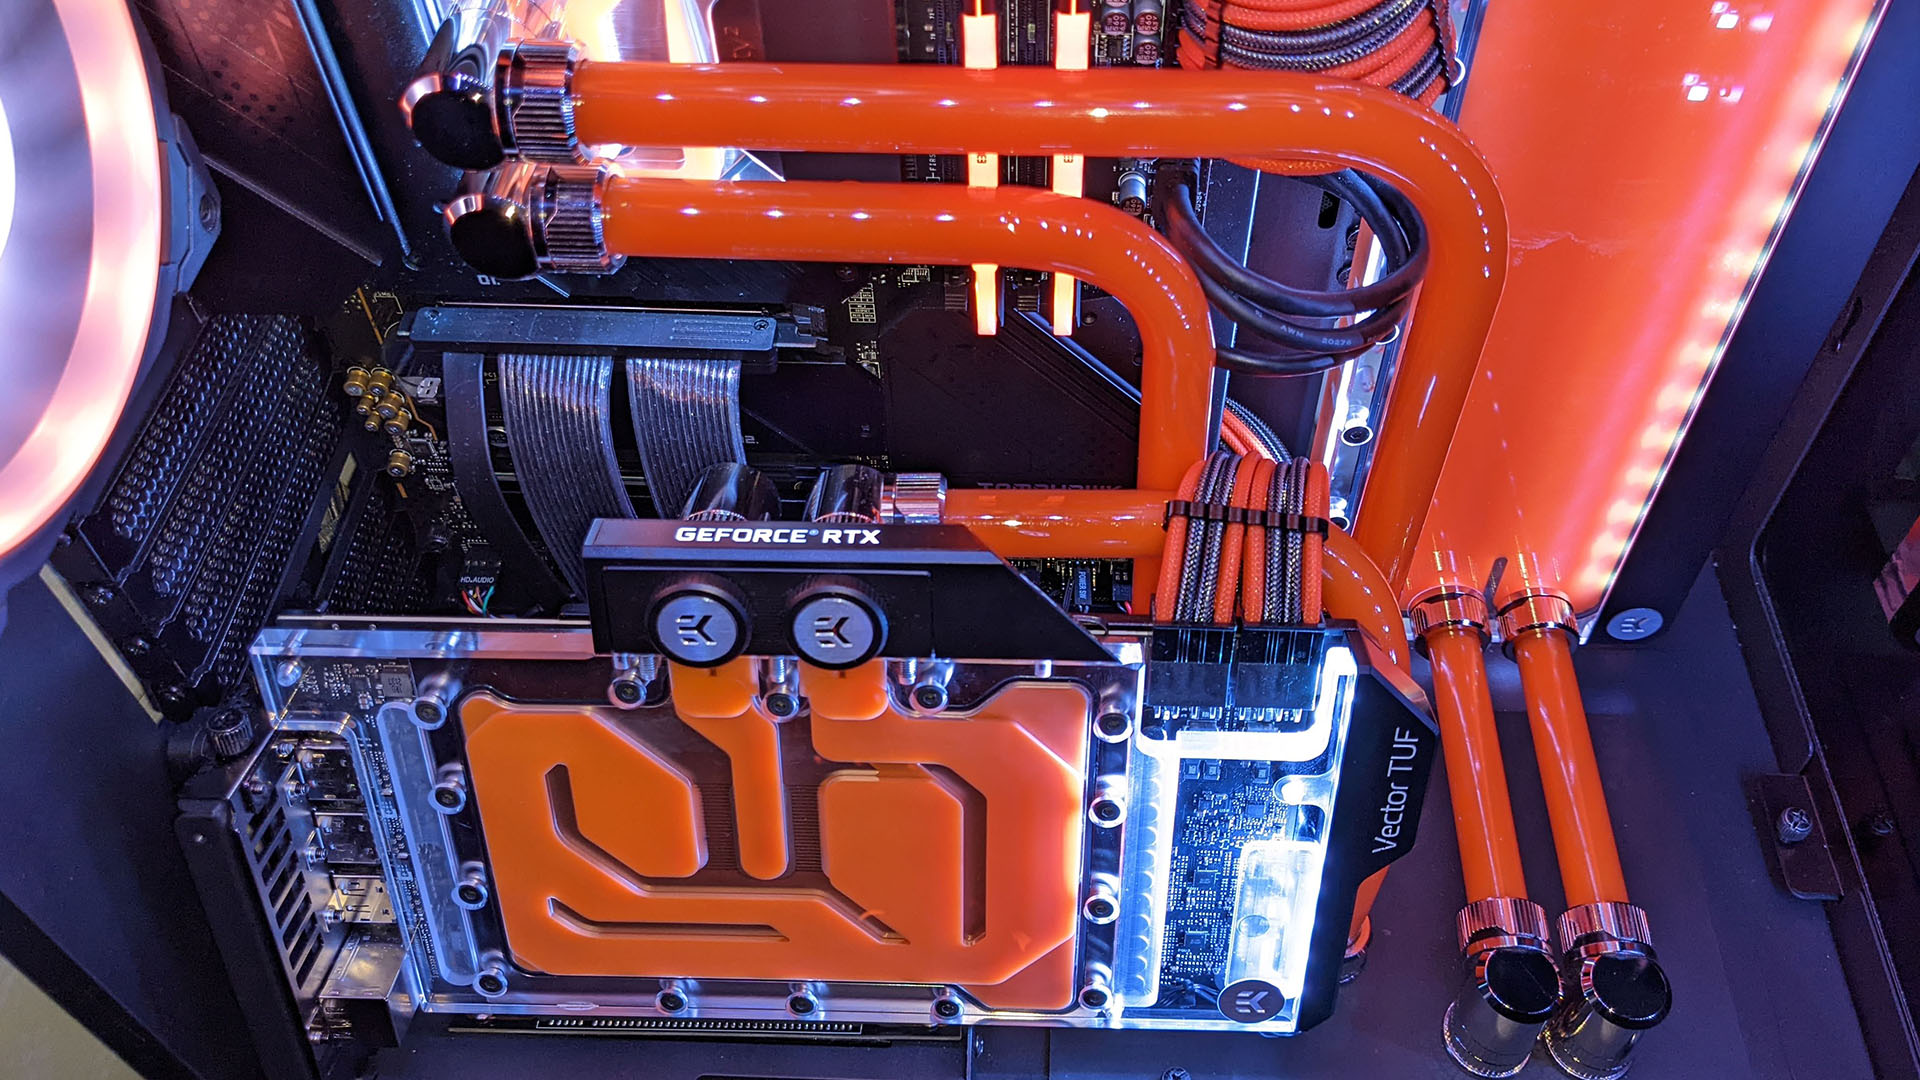 The angled graphics card in the watercooled gaming PC